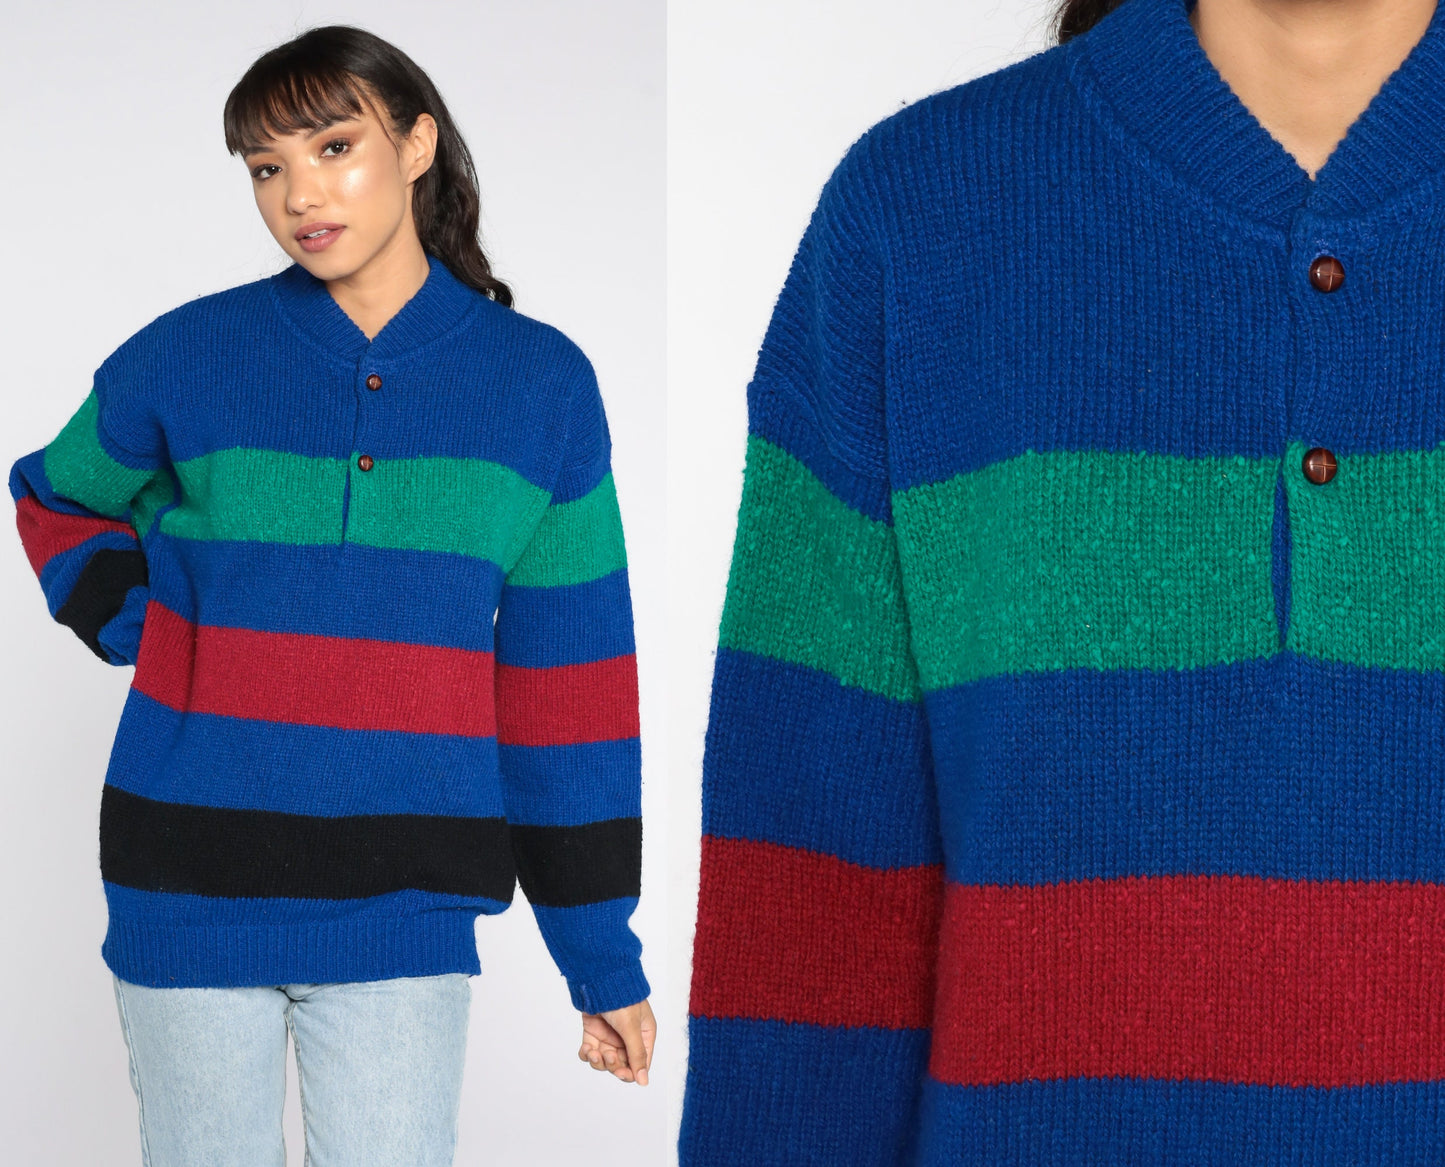 80s Pendleton Sweater Wool Blend Striped Sweater Knit Slouchy Pullover Jumper Knit 1980s Vintage Red Blue Medium